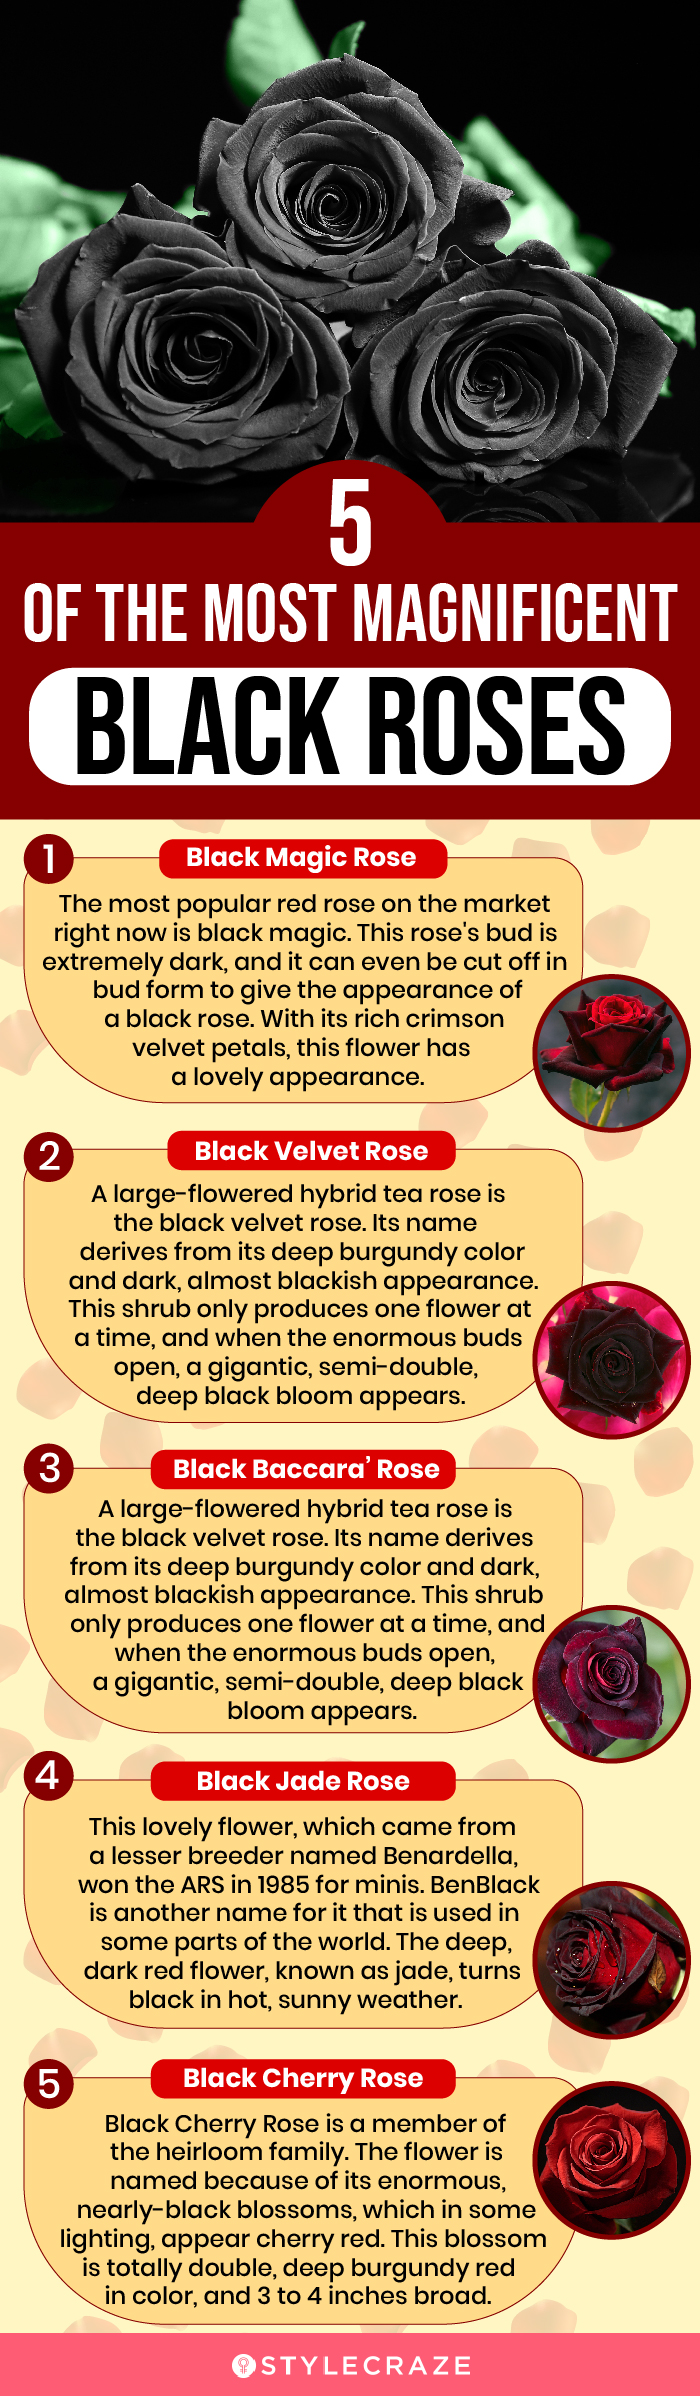 5 of the most magnificent black roses (infographic)